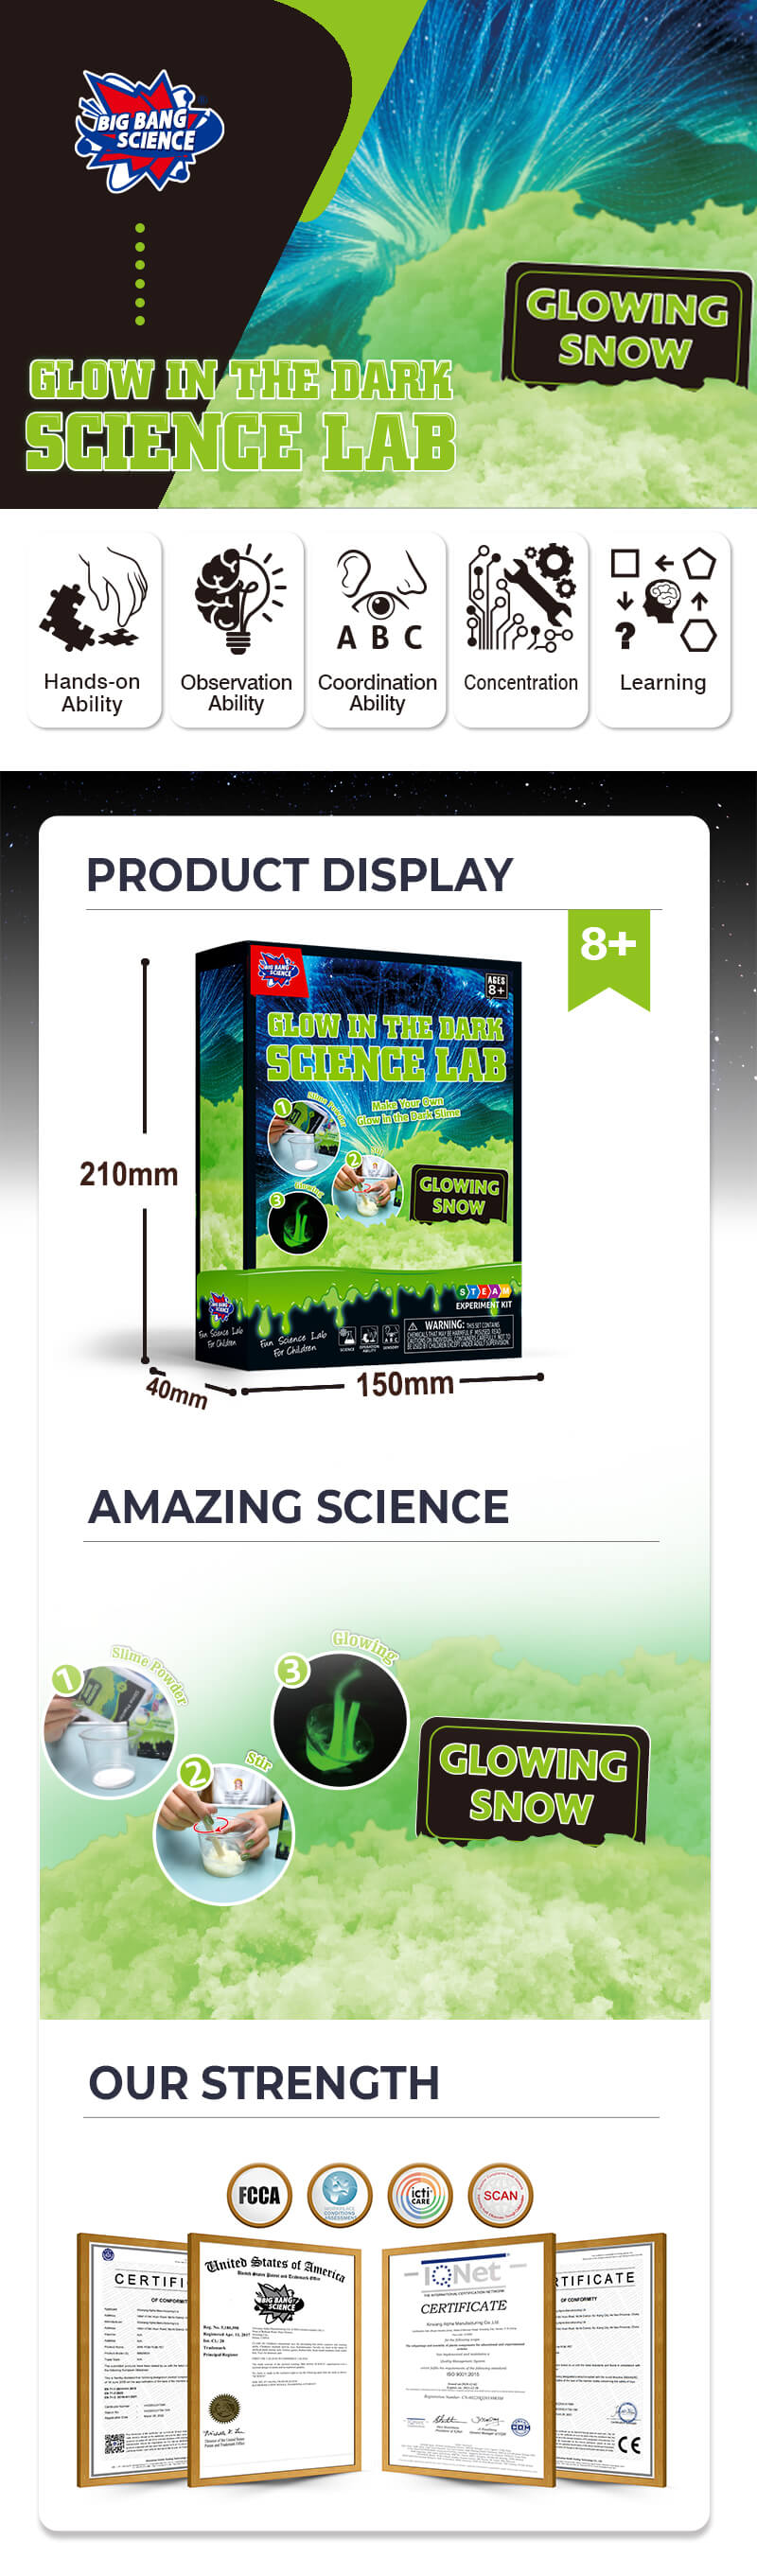 Glow-In-The-Dark-Science-Lab--New-Arrivals-Product-details-chart